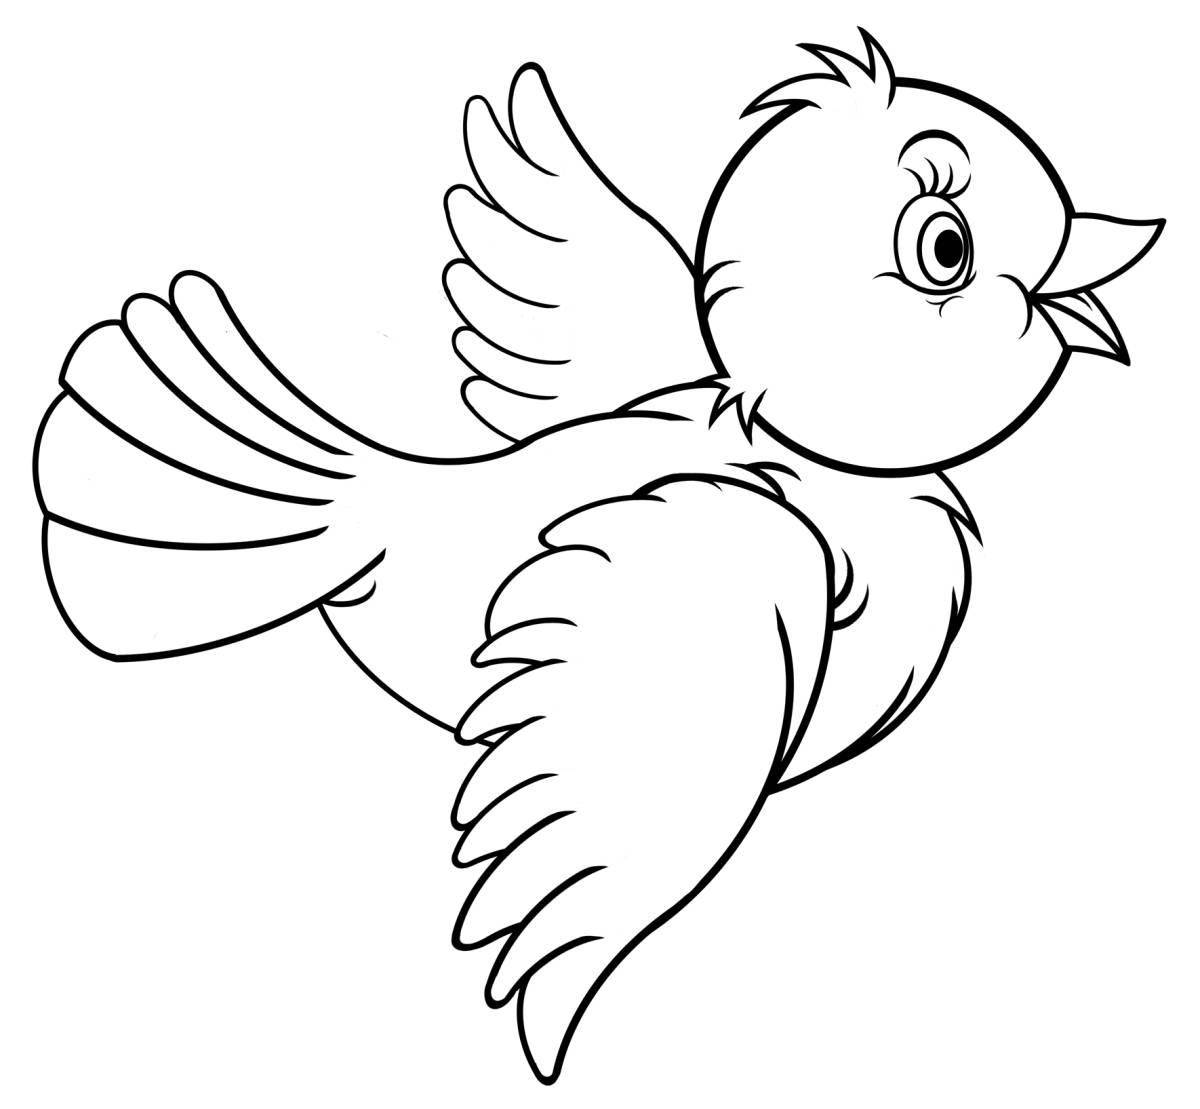 Cute sparrow coloring book for 6-7 year olds